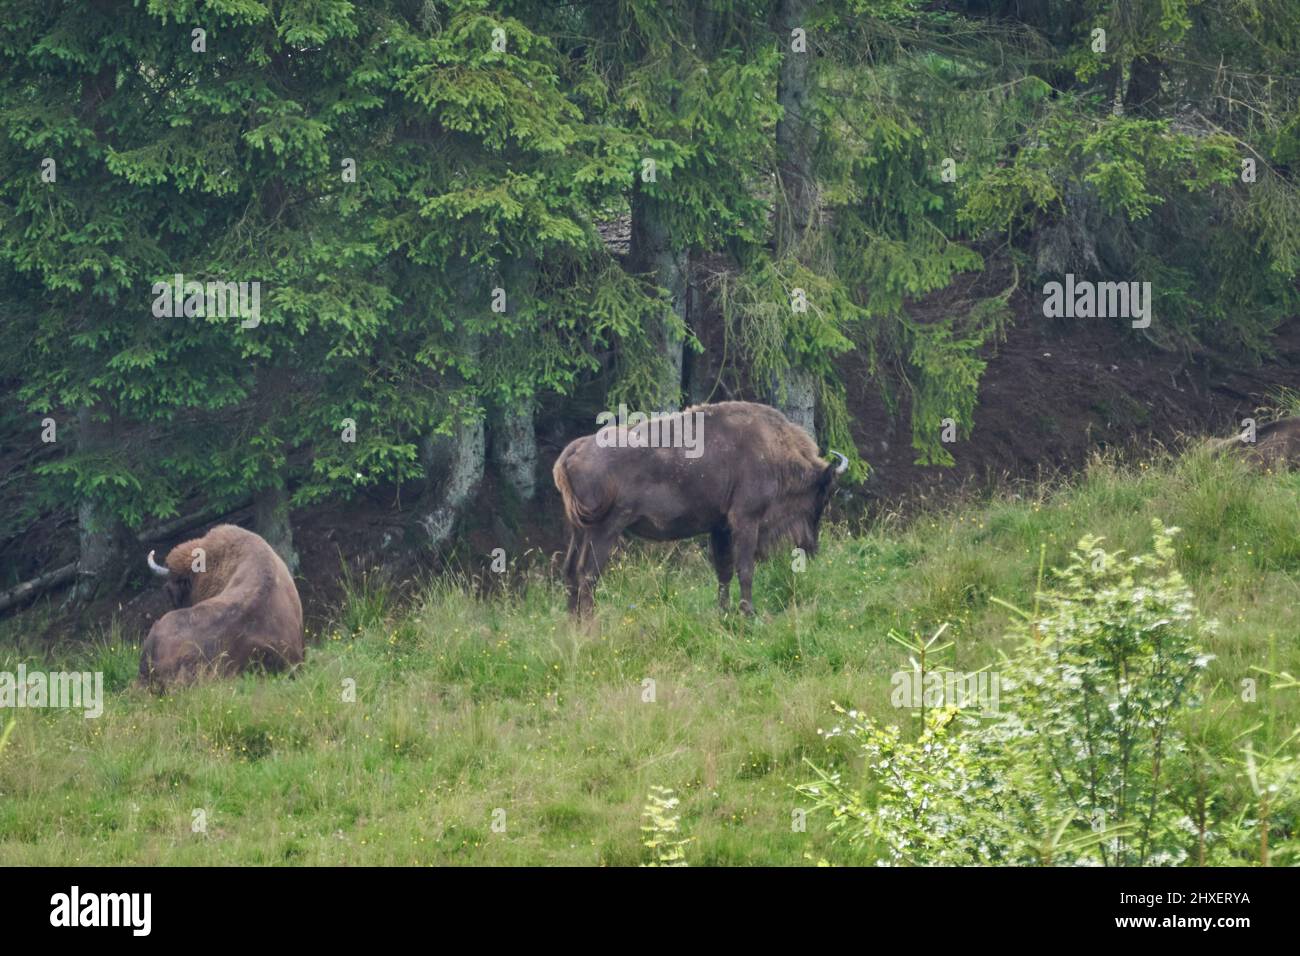 european bison, Wisent, Bos bonasus, grazing on meadow in the shaddows of a nearby forest along the Rothaarsteig hiking trail. Stock Photo